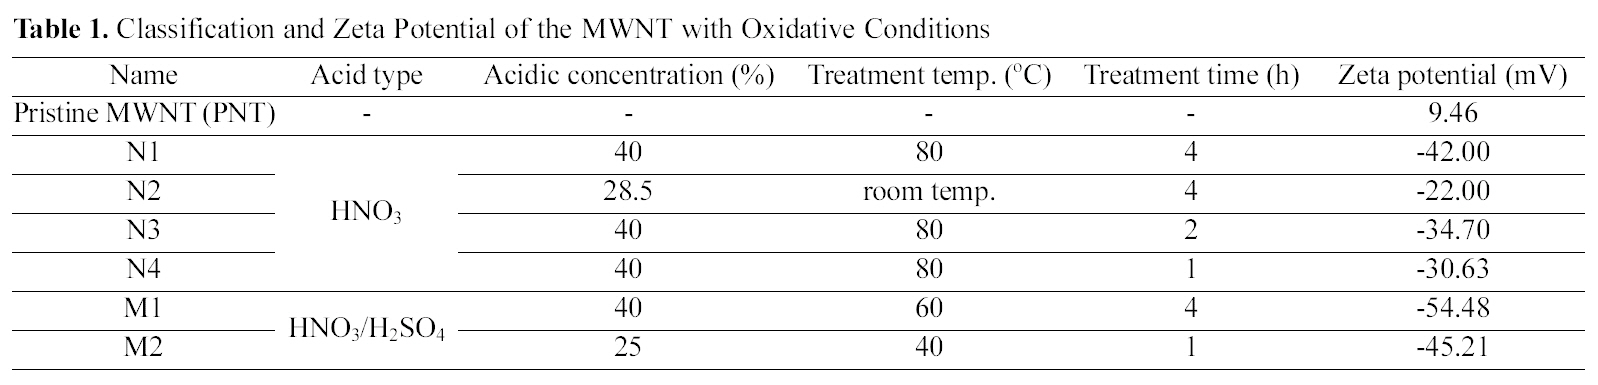 Classification and Zeta Potential of the MWNT with Oxidative Conditions